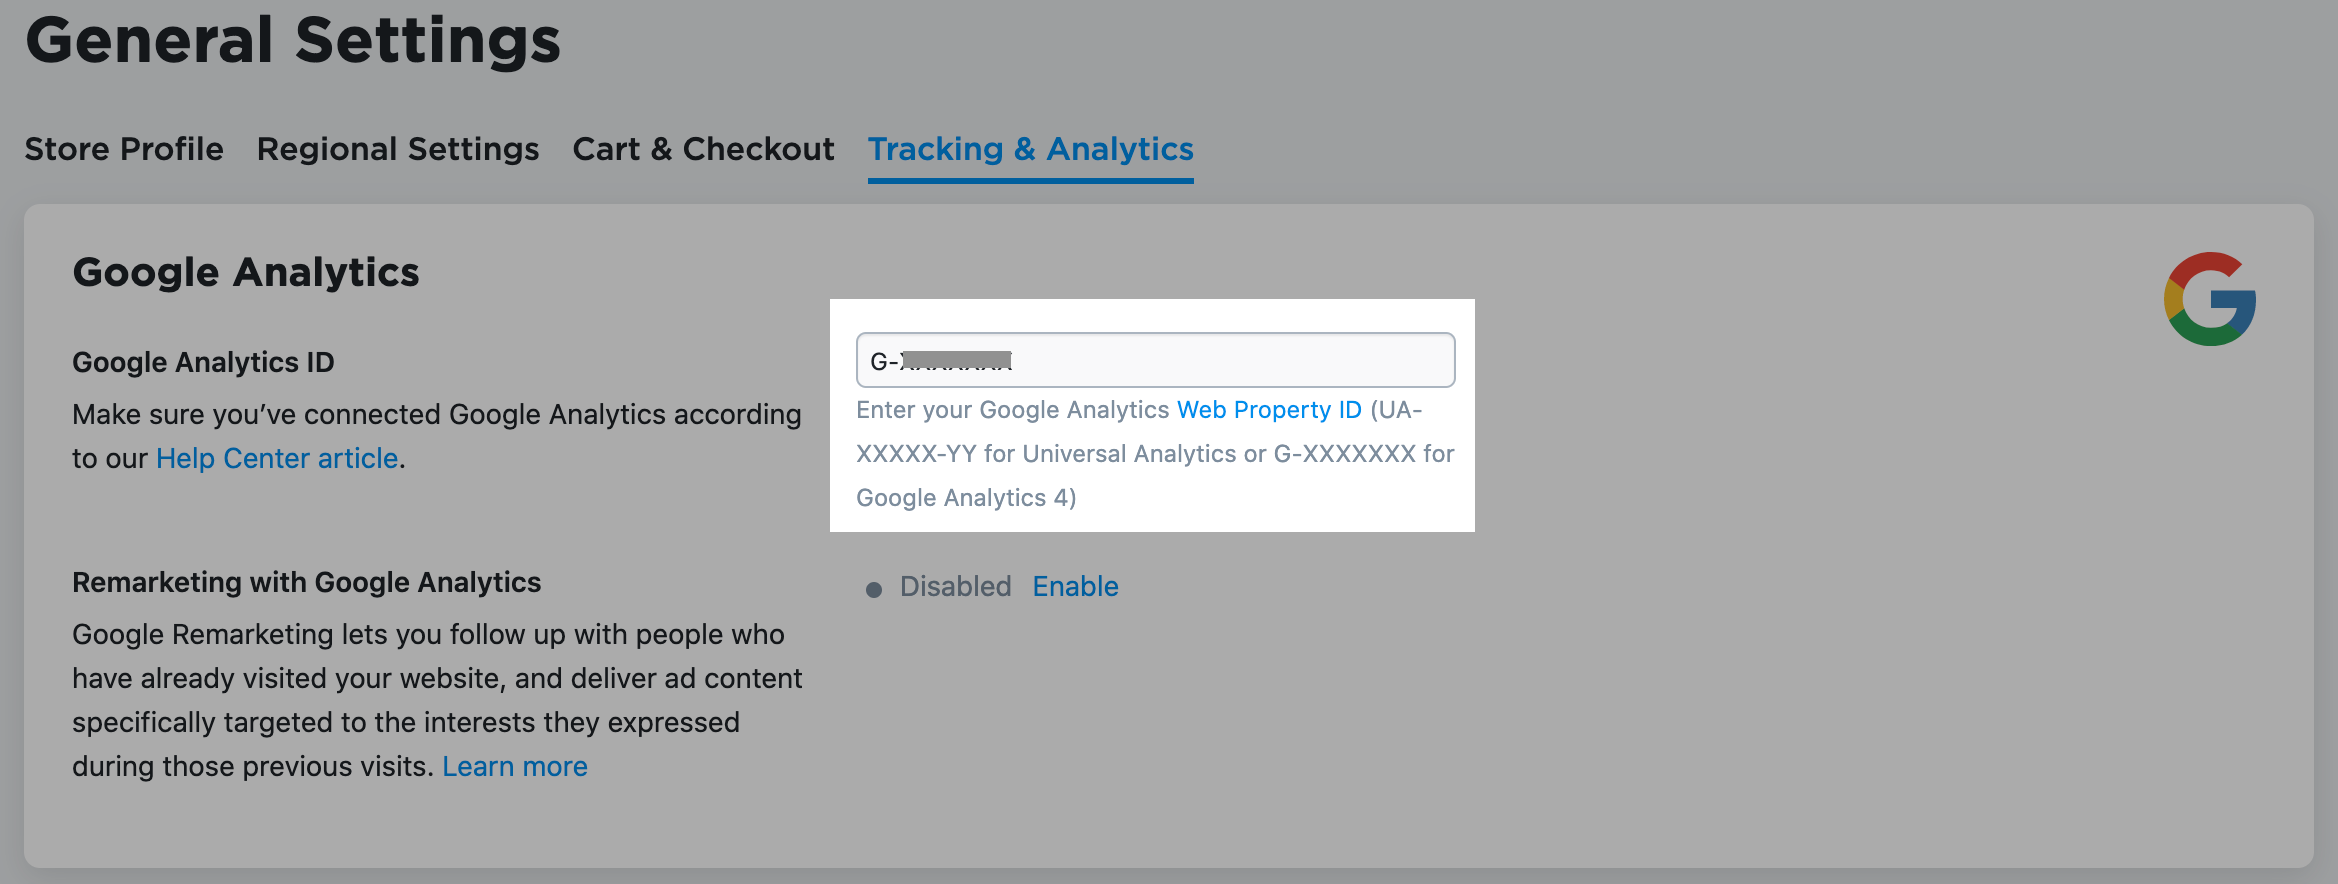 Enabling_Google_Analytics_for_store__3_.png